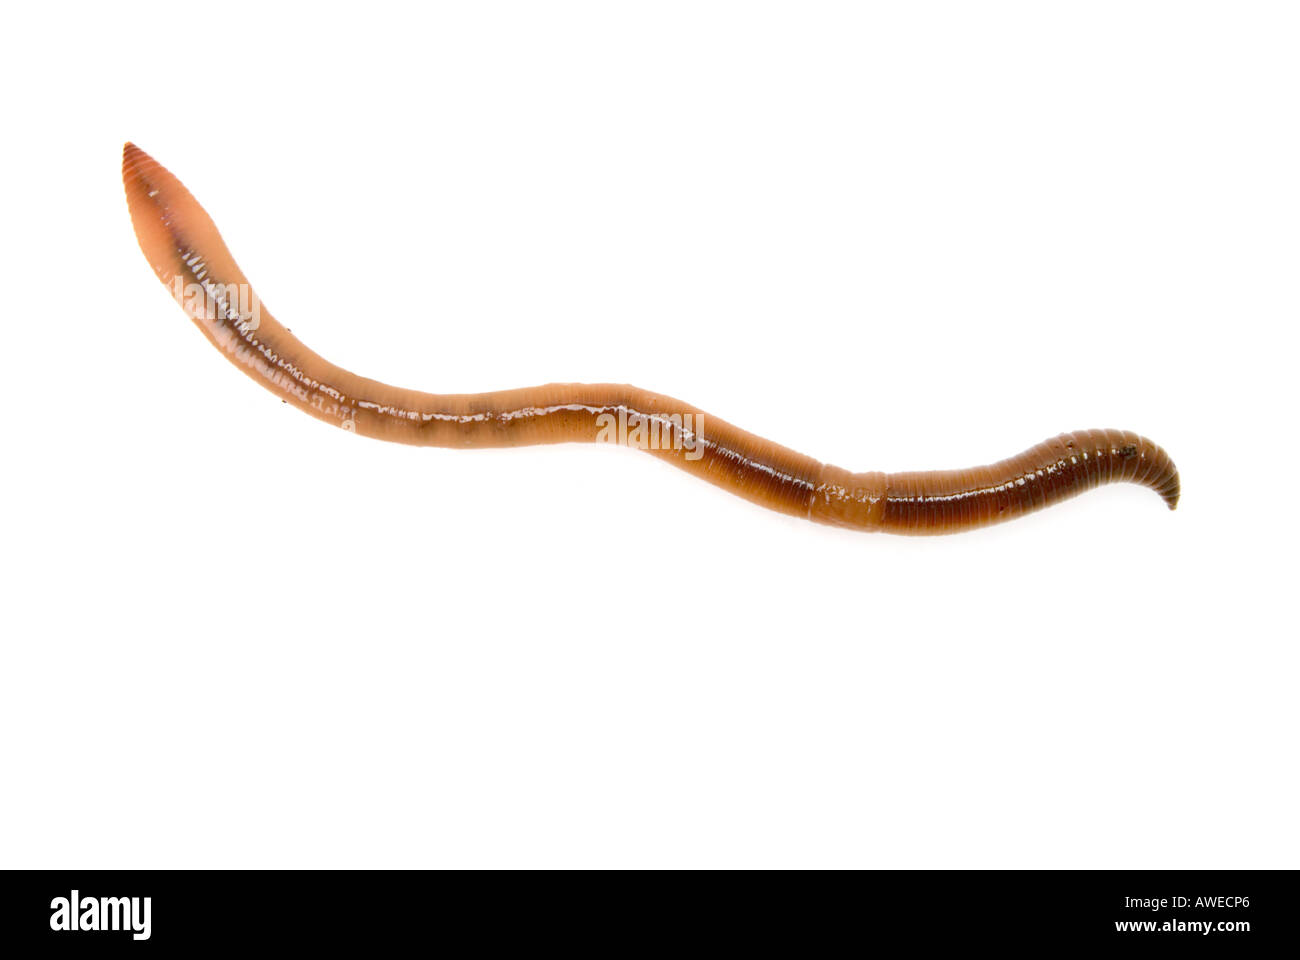 Earthworm dung Cut Out Stock Images & Pictures - Alamy